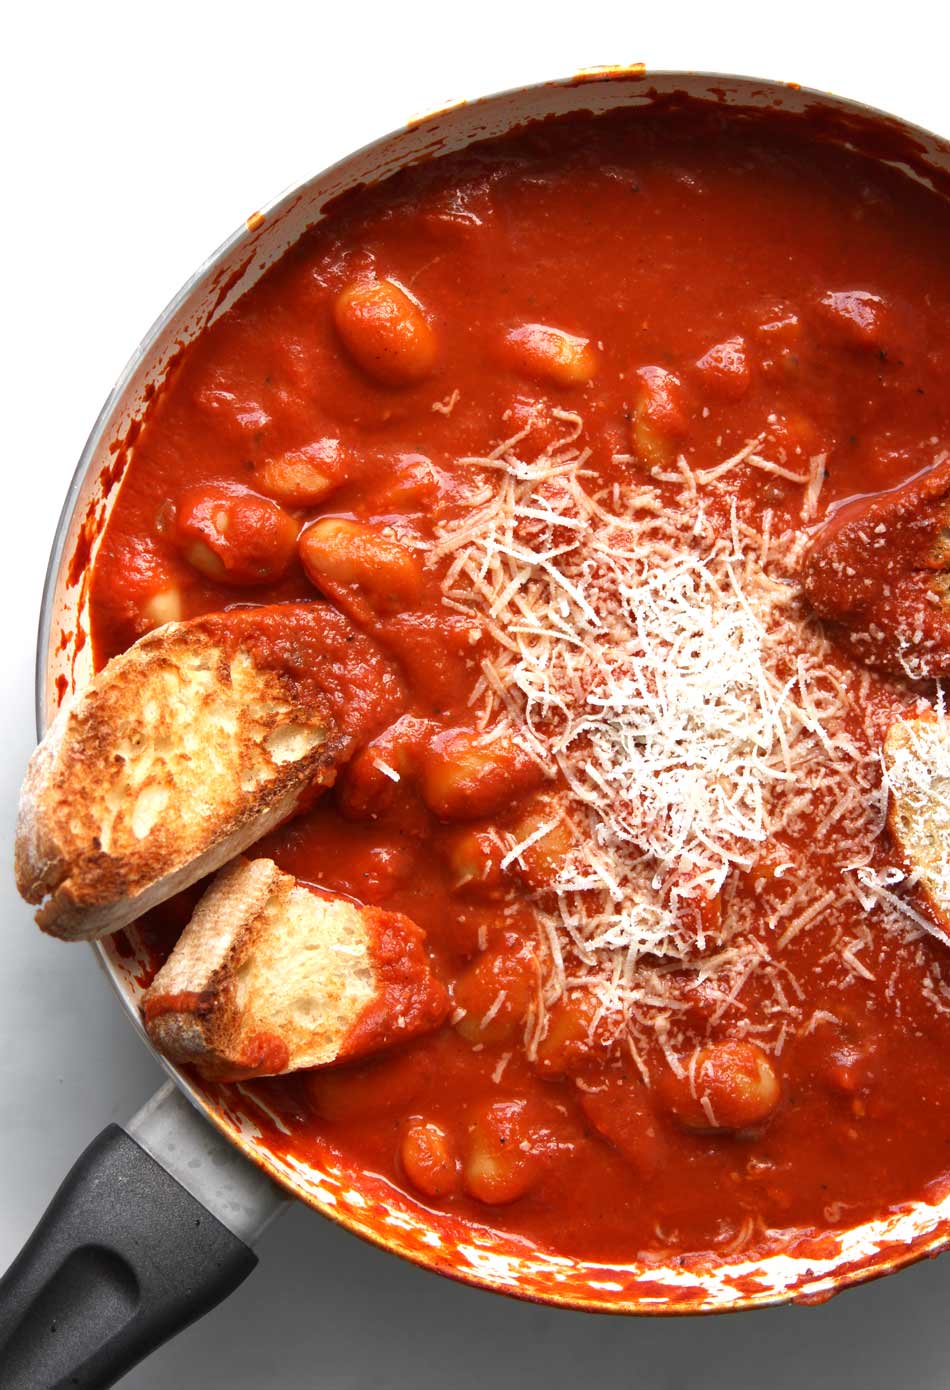 beans in tomato sauce with bread